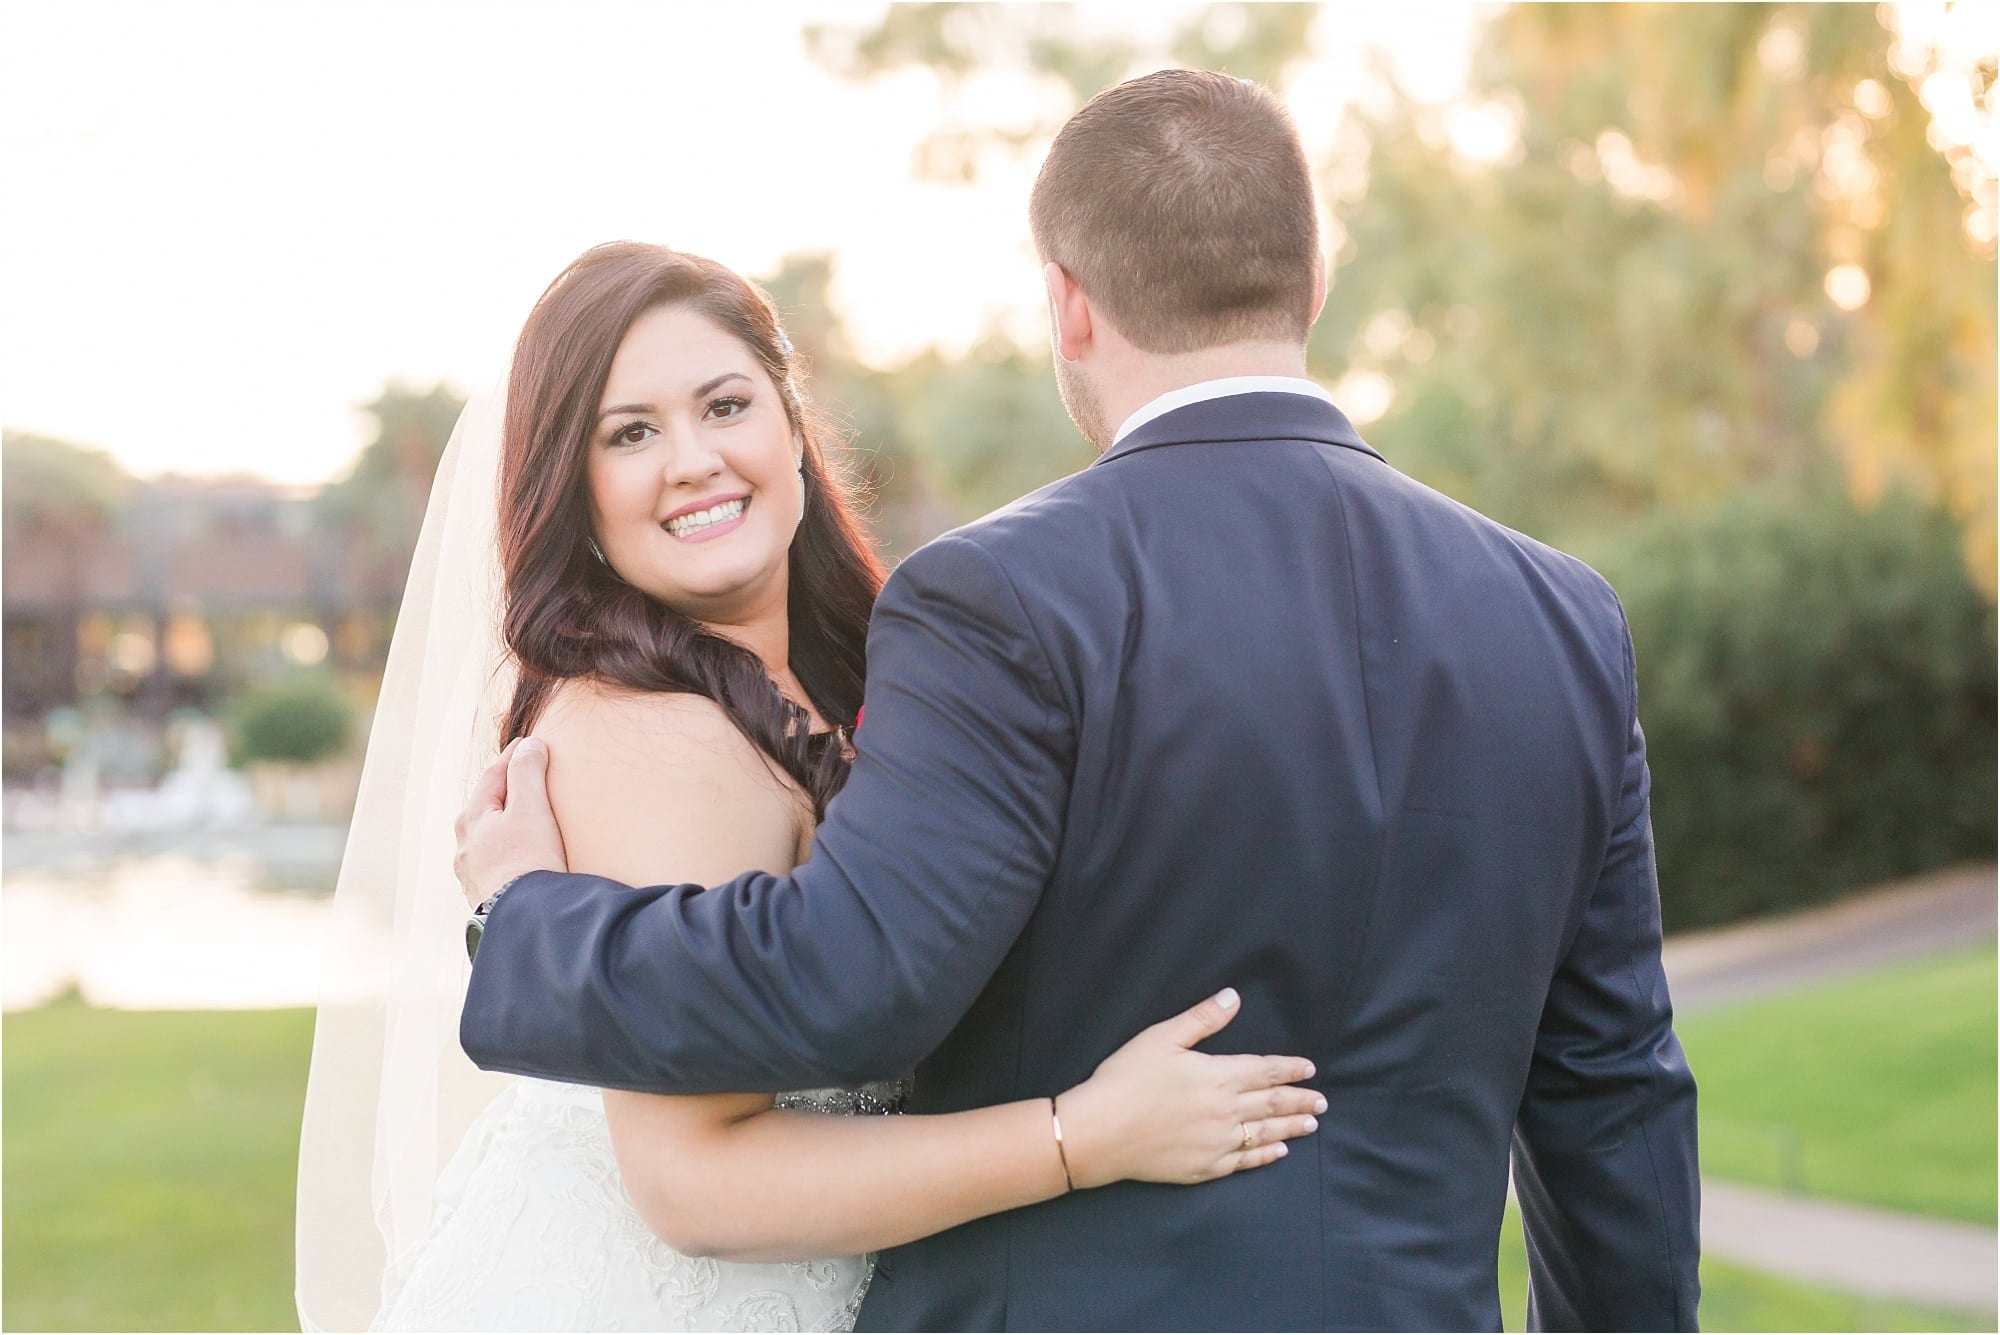 Gainey Ranch Wedding Pictures